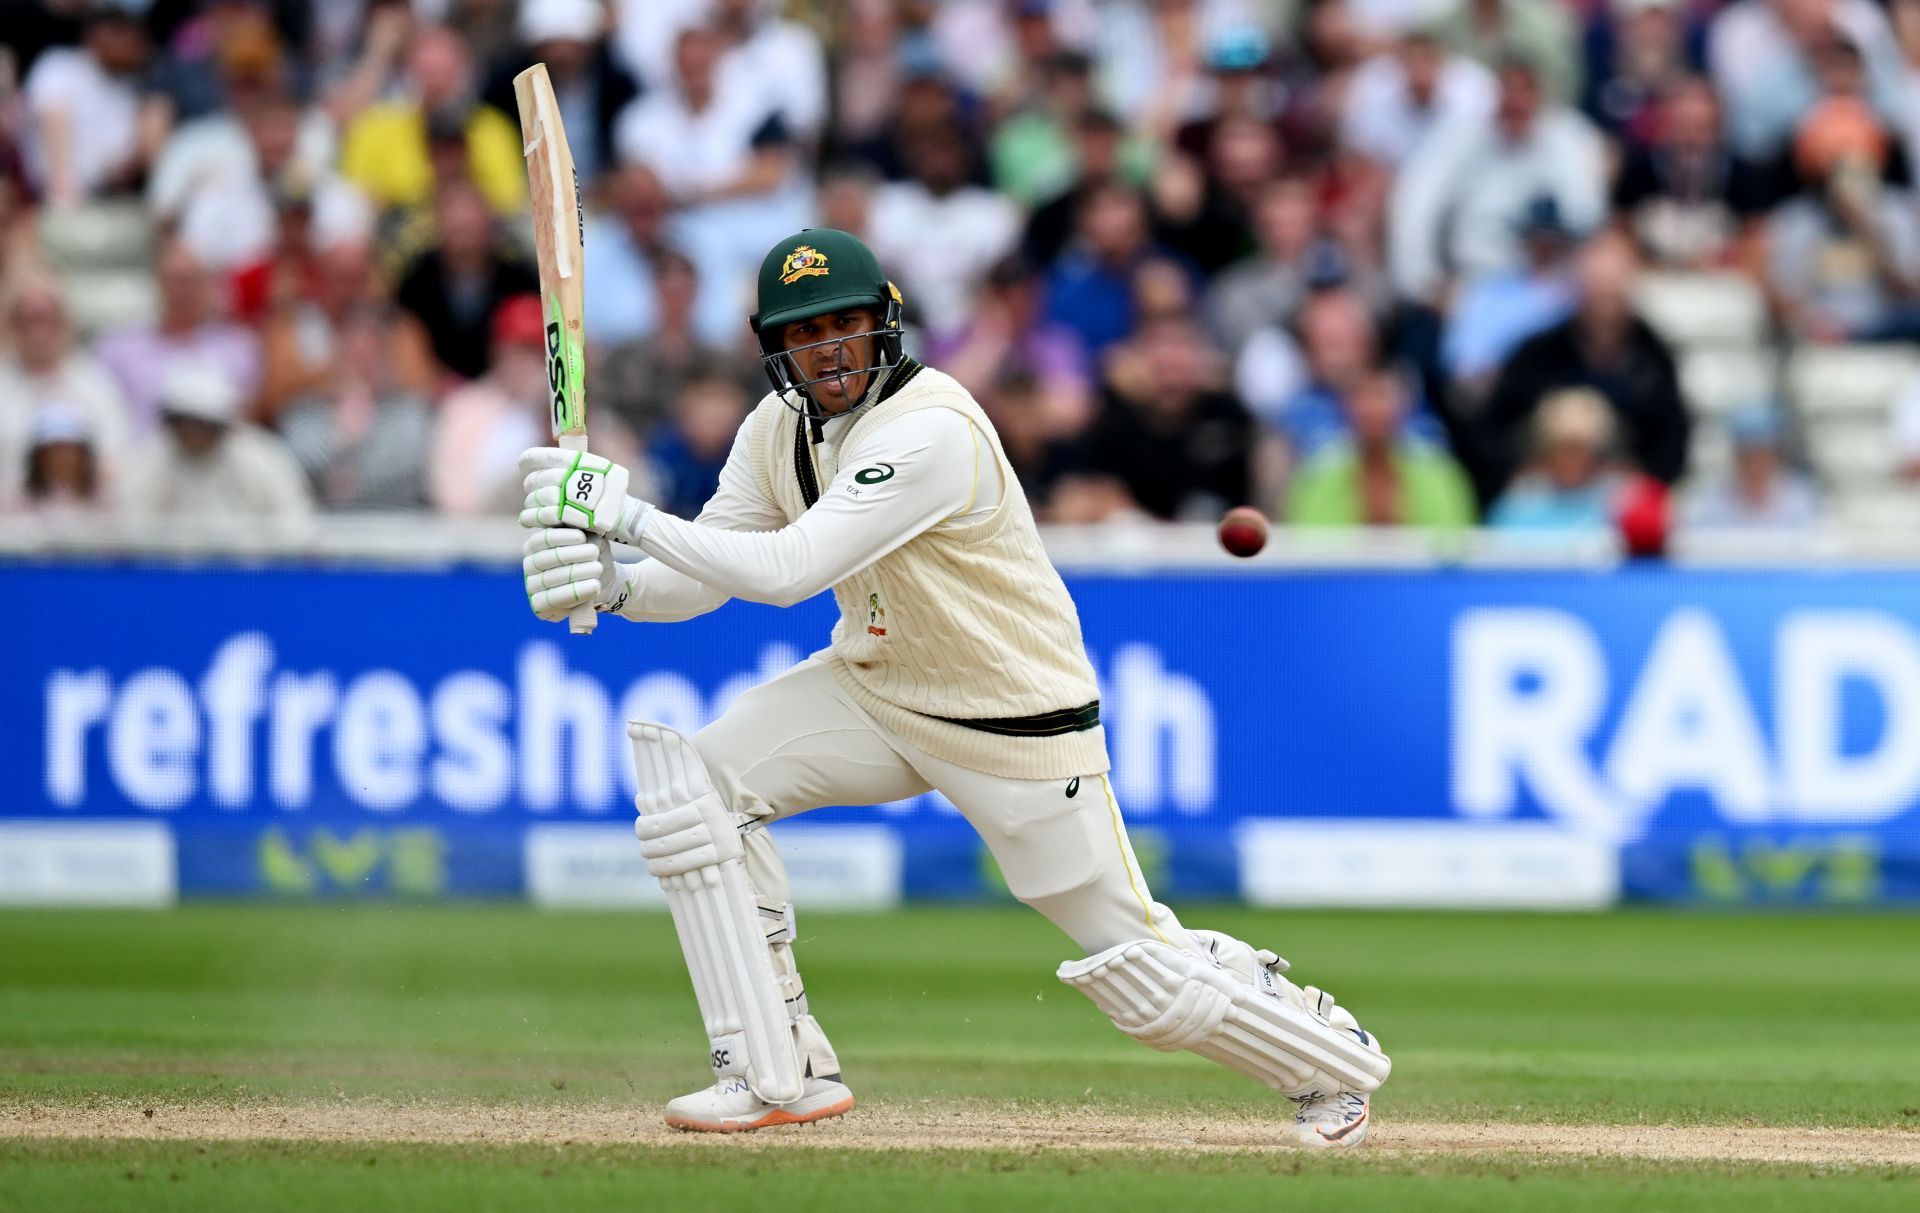 Usman Khawaja succeeded for Australia by playing traditional Test cricket. (Pic: Getty Images)